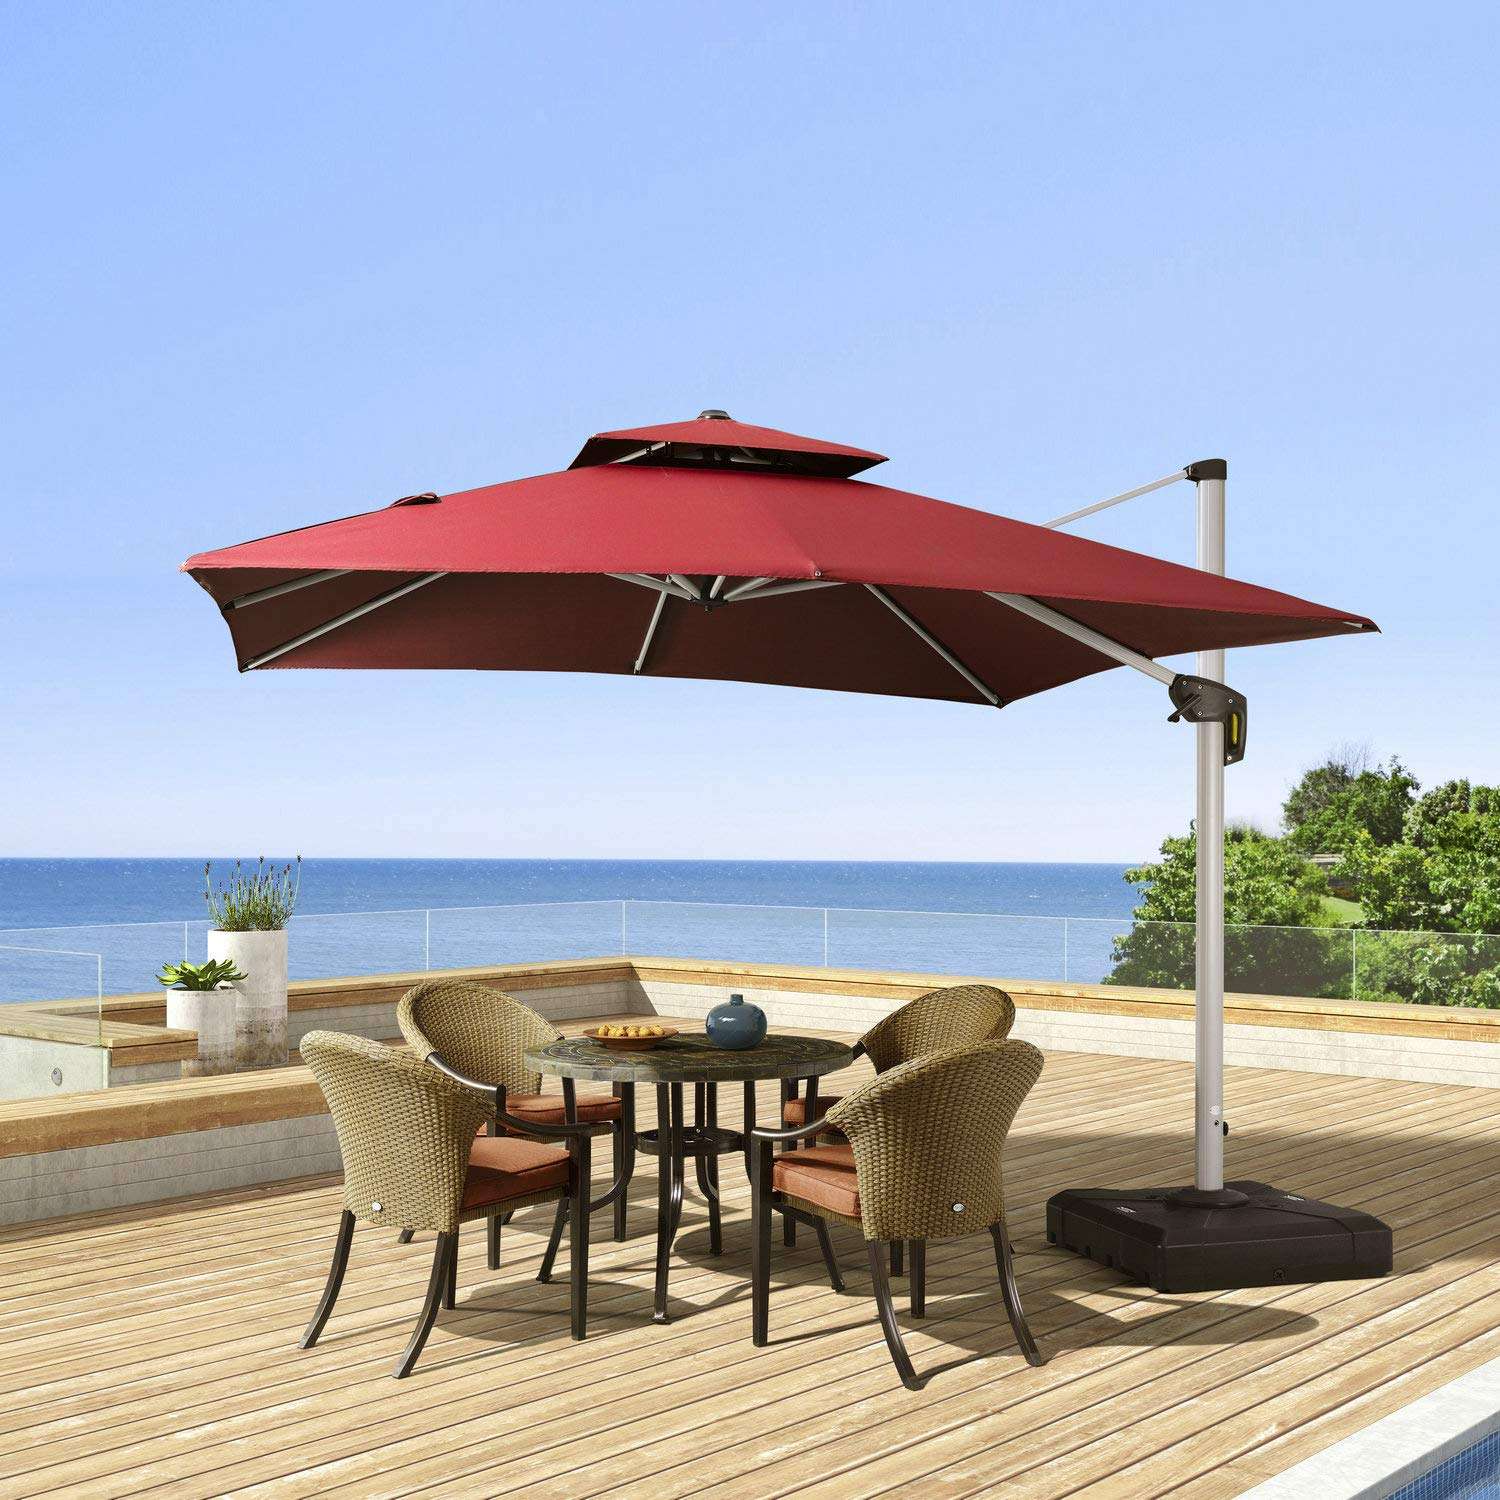 Patio Umbrella Replacement Canopy â Products Advisors